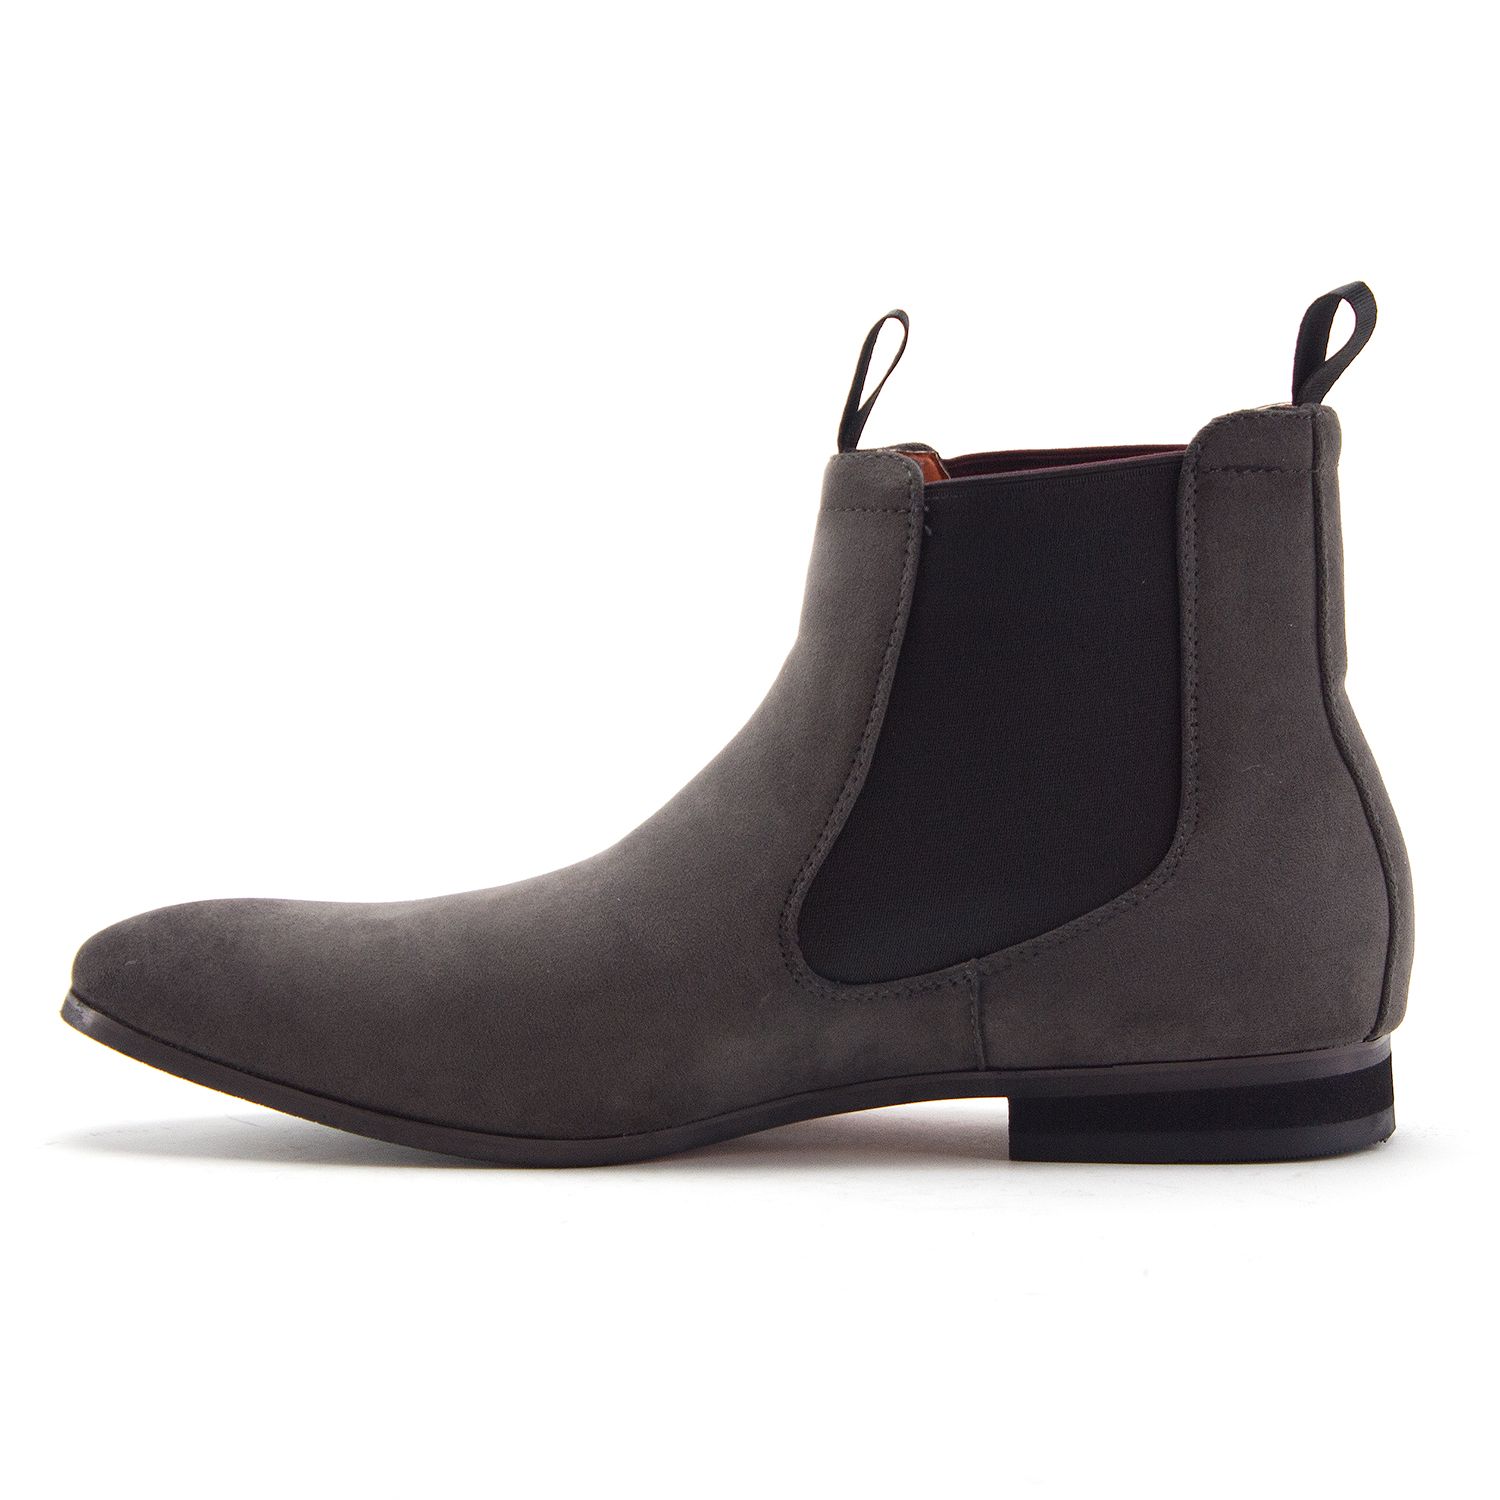 Men's B-746 Pull-On Nubuck Ankle High Chelsea Dress Boots, Charcoal, 9.5 - image 2 of 3